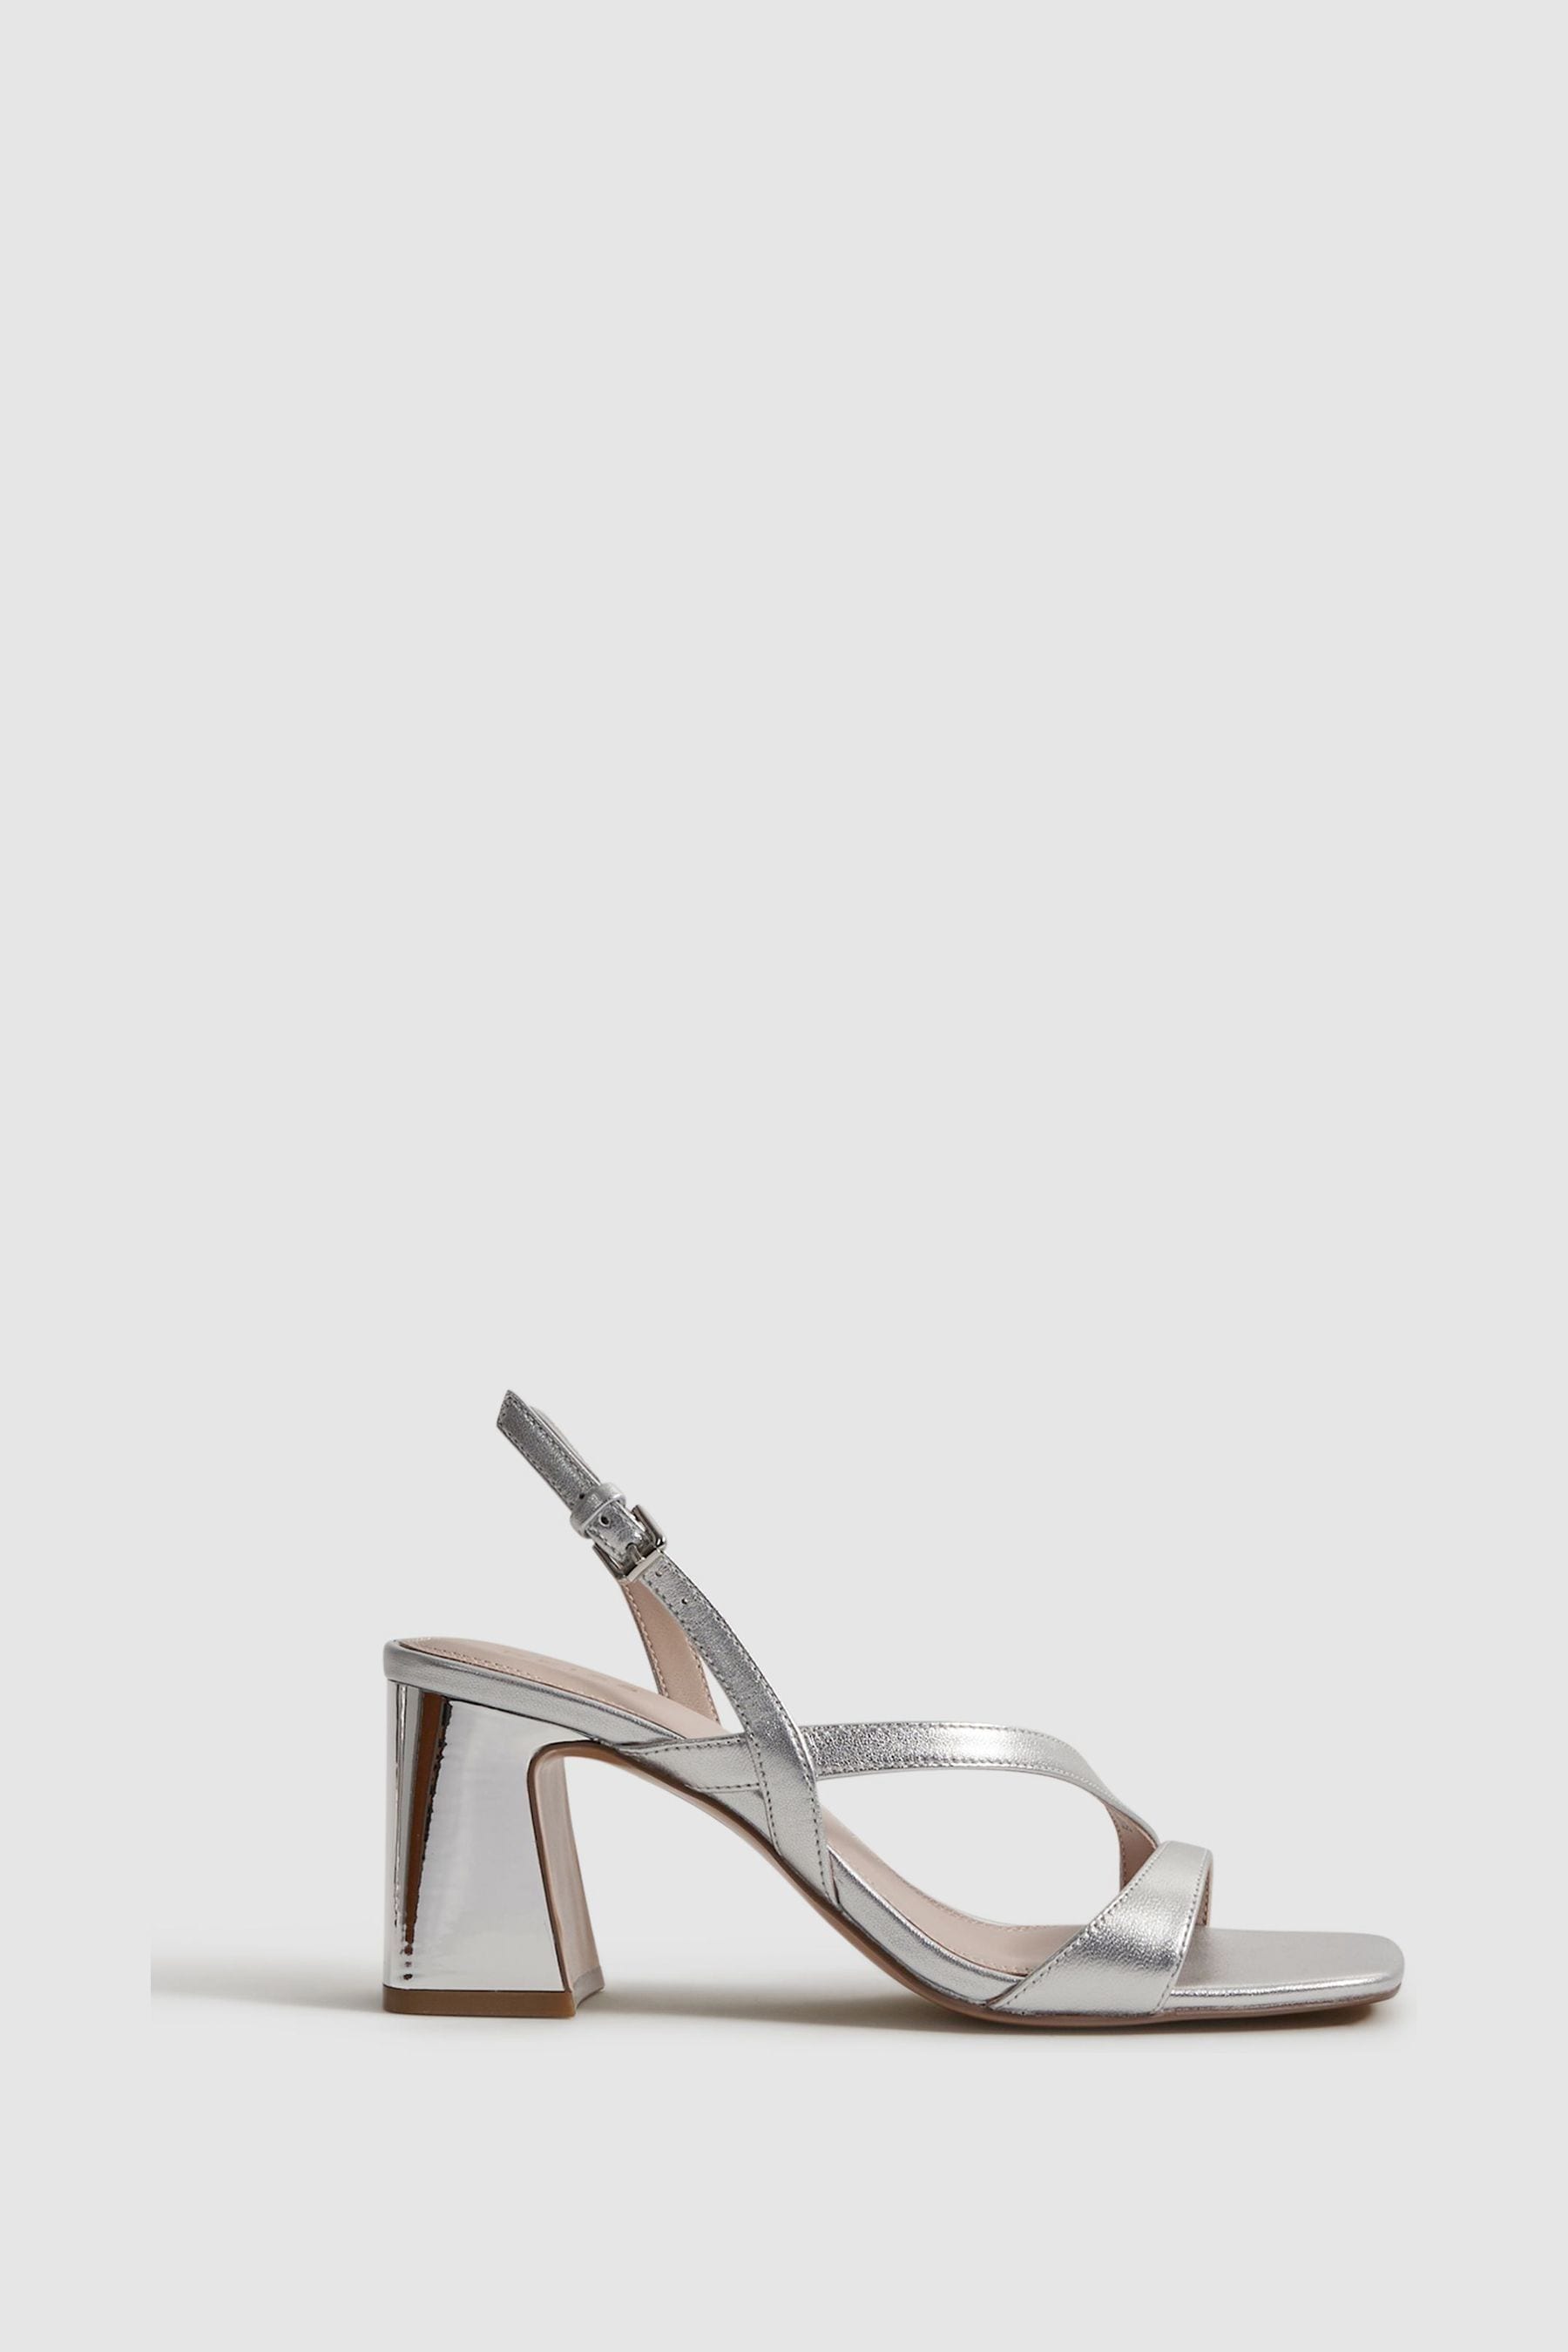 Reiss Alice - Silver Strappy Leather Heeled Sandals, Uk 8 Eu 41